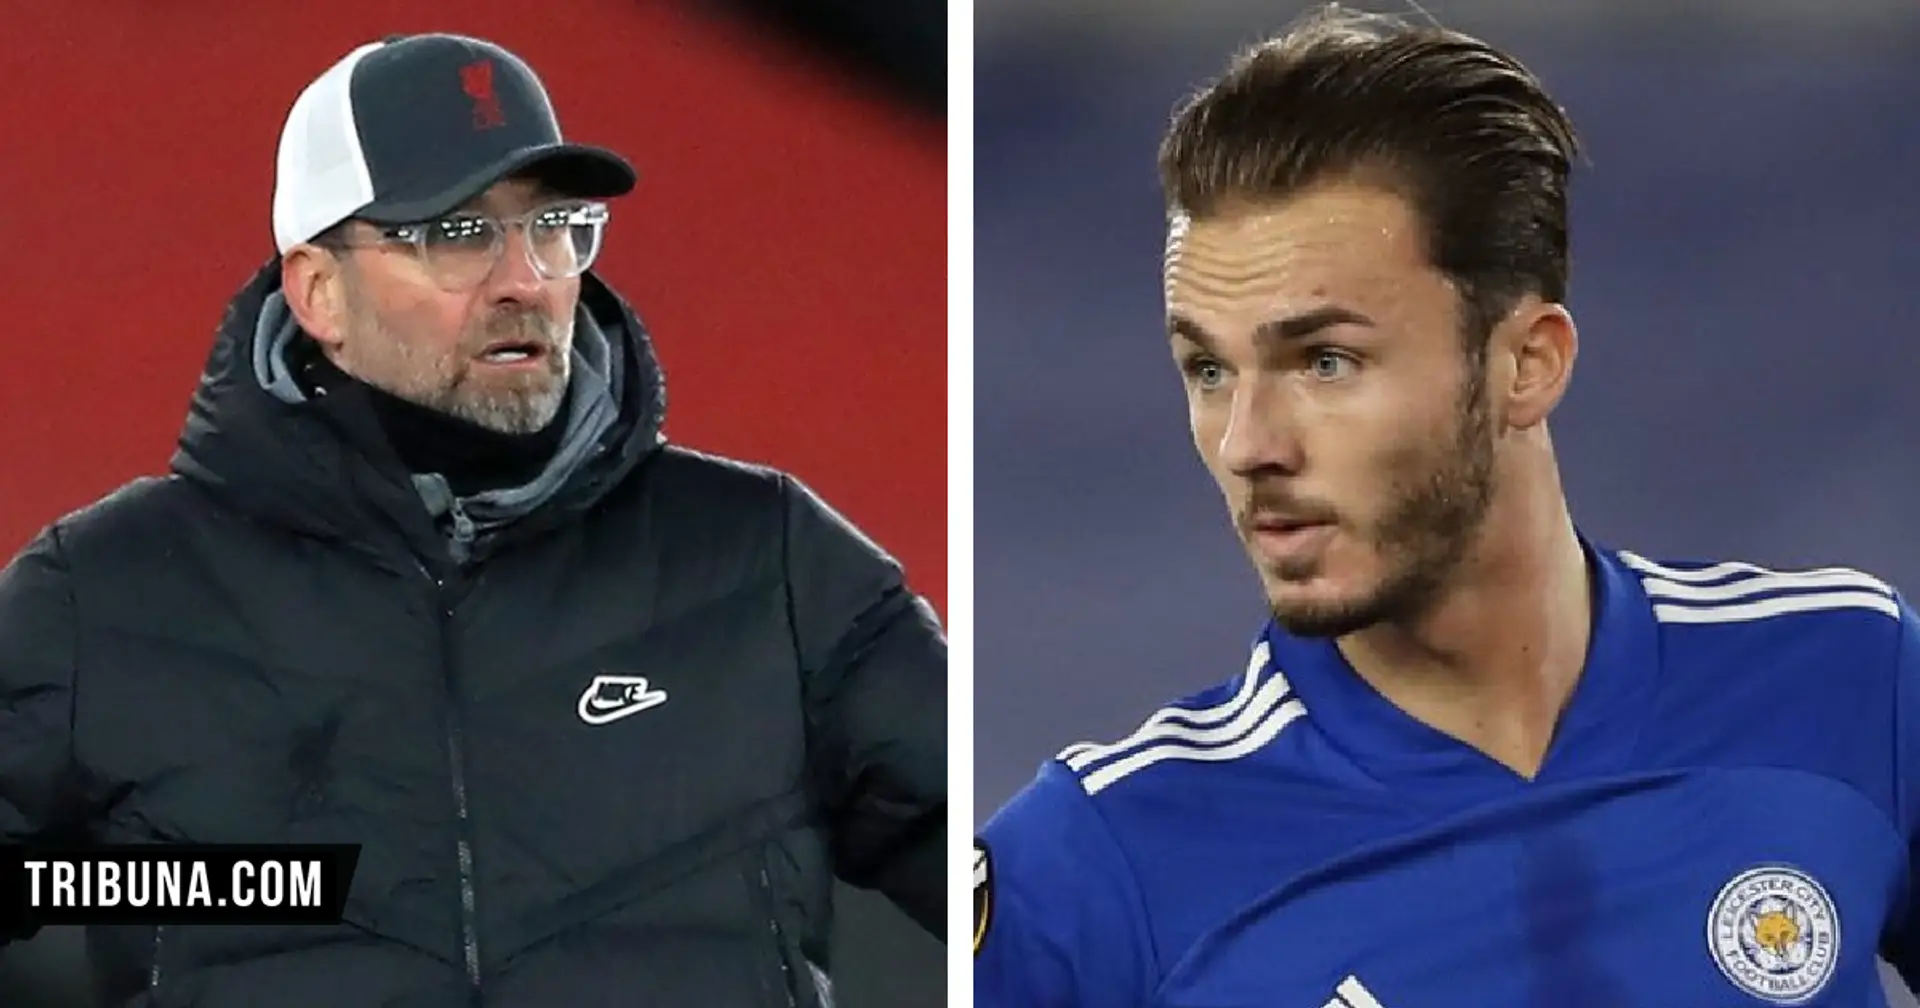 'Let them talk about Liverpool and United': James Maddison sends title message